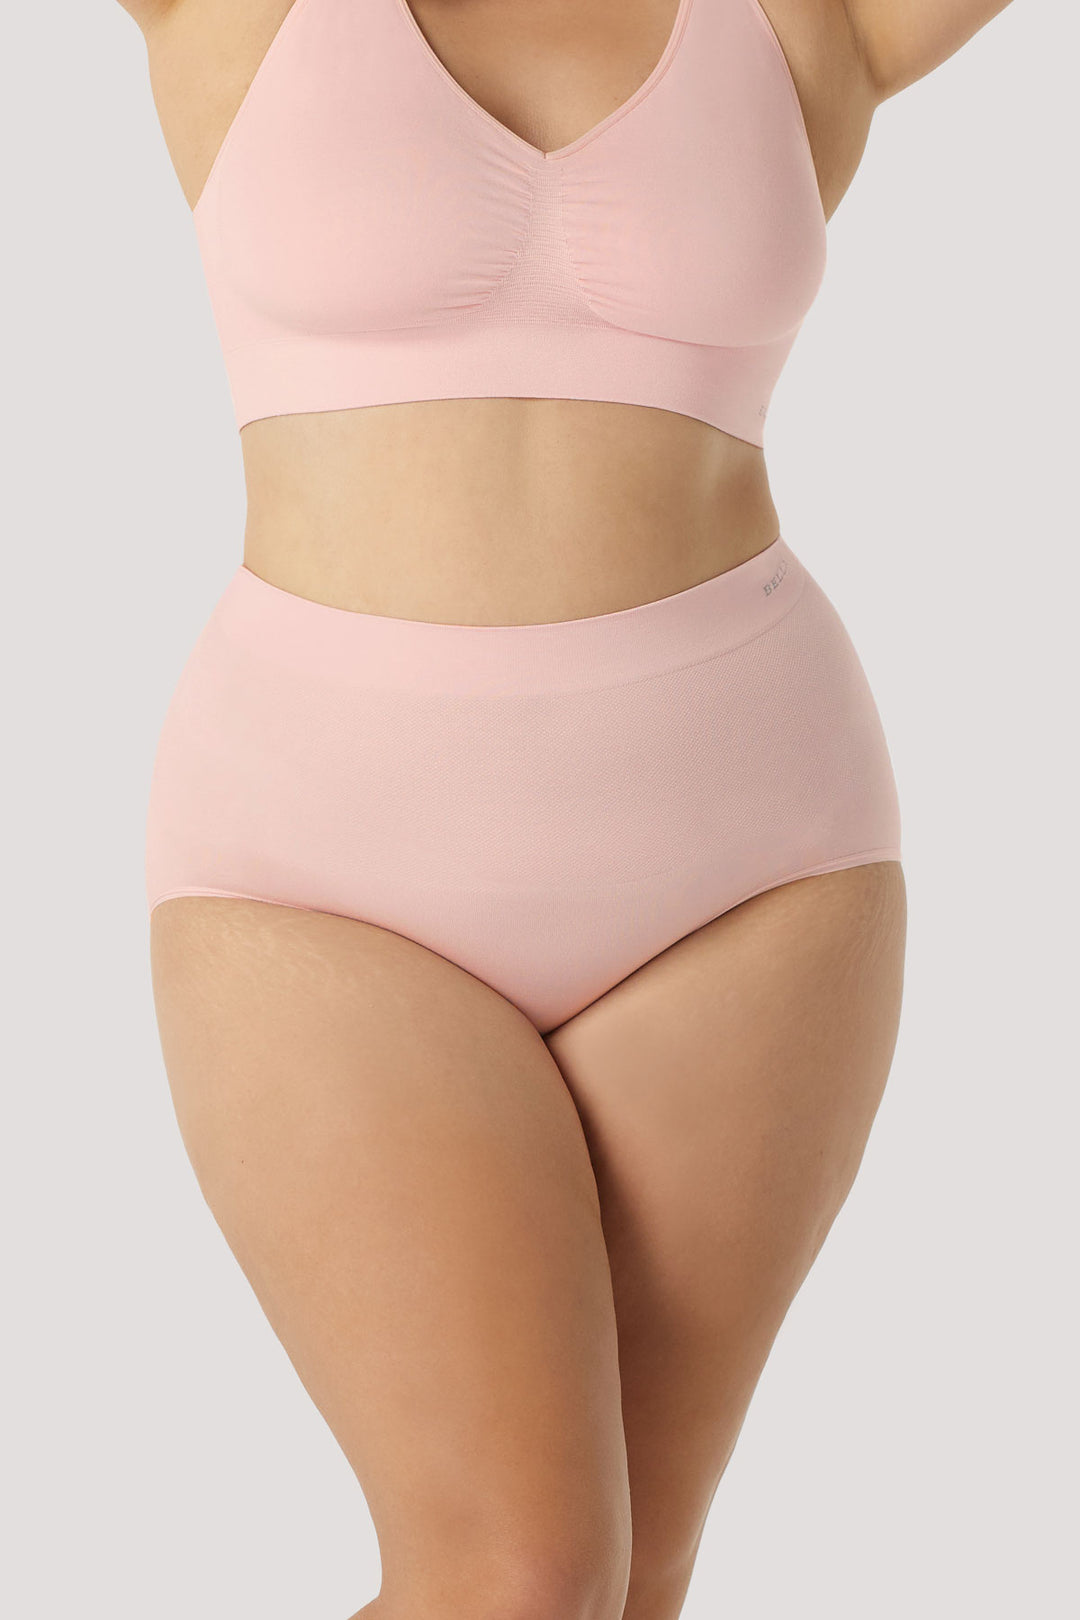 Women's breathable bamboo high waist control and firming underwear | Bella Bodies Australia | Carnation Pink | Front